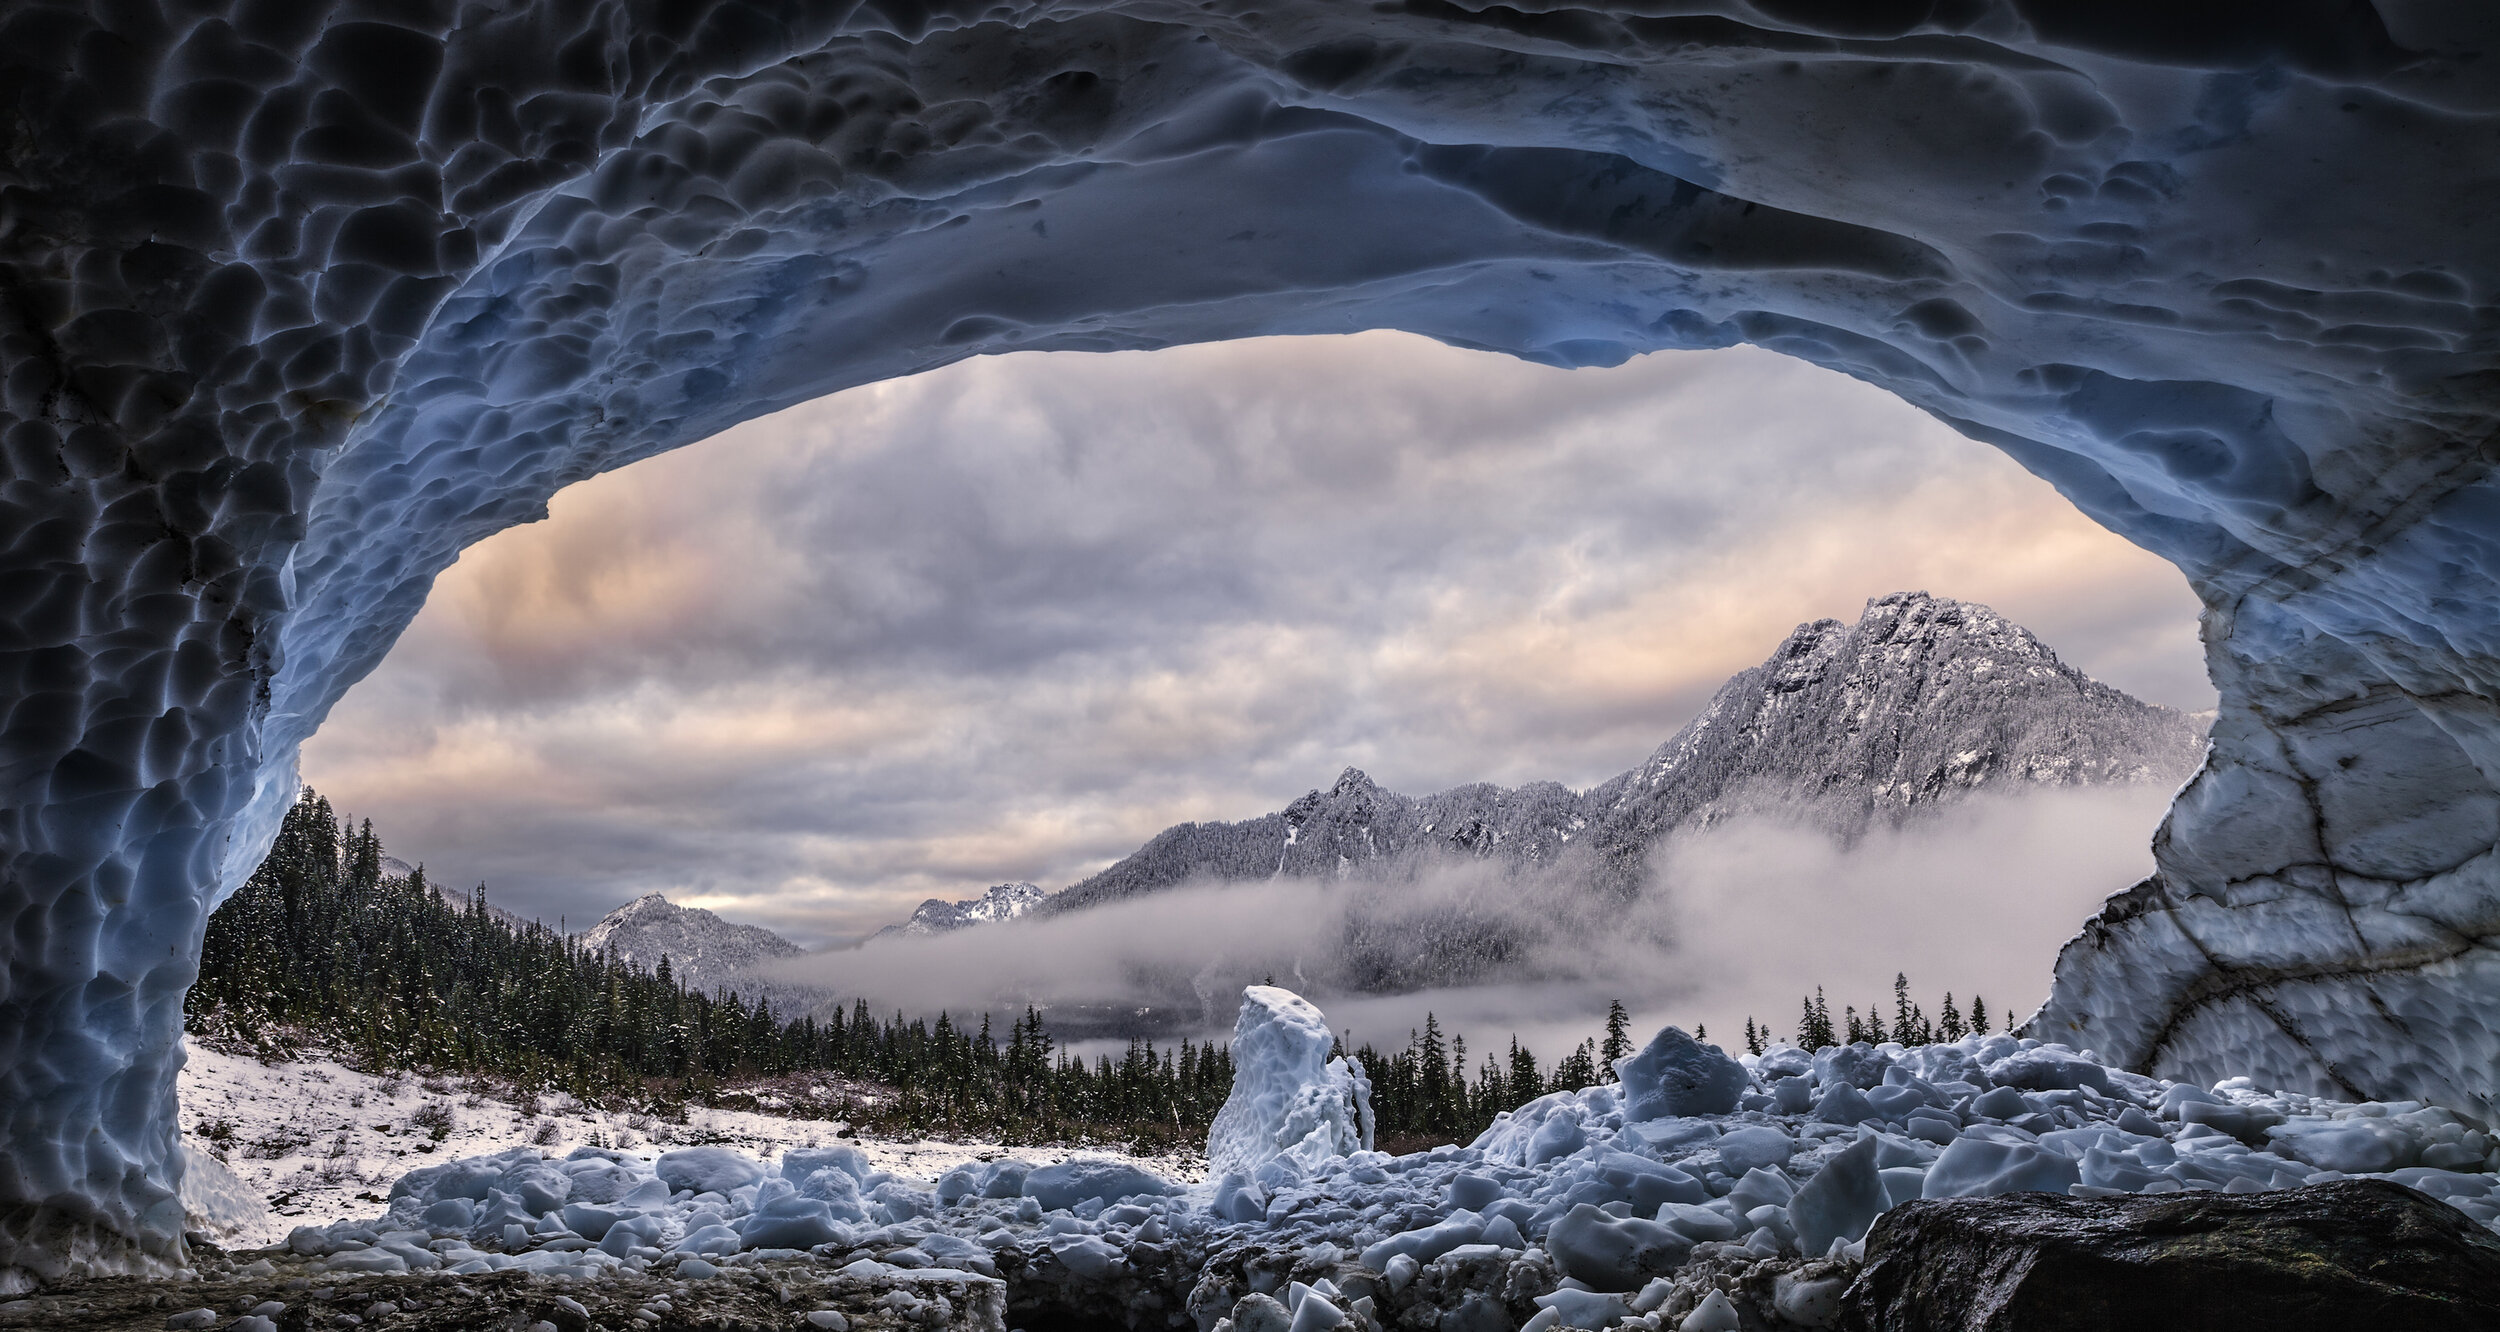 Ice cave with a view.jpg